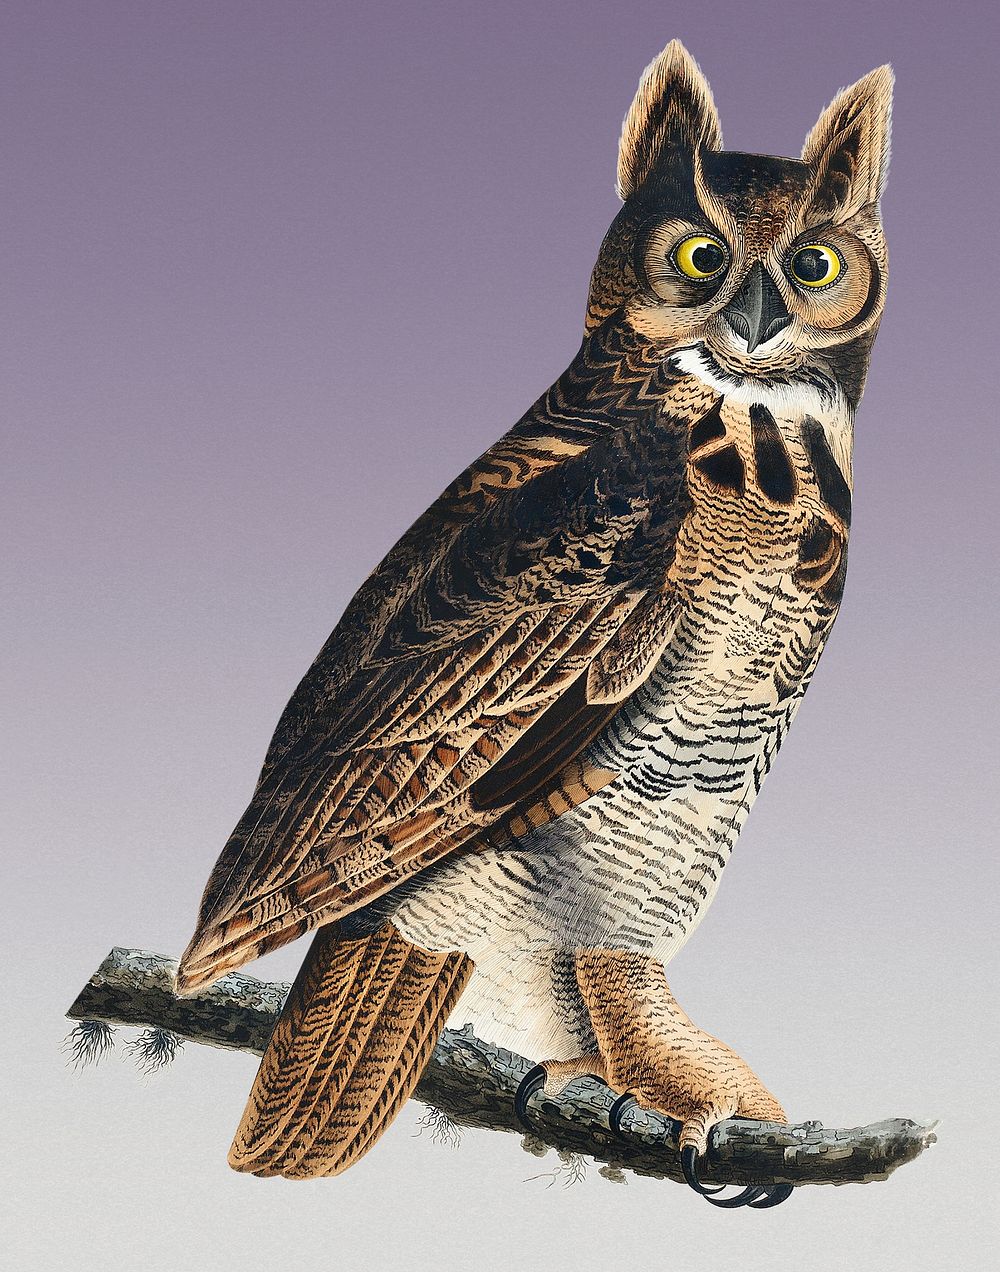 Vintage Illustration of Great Horned Owl from Birds of America.